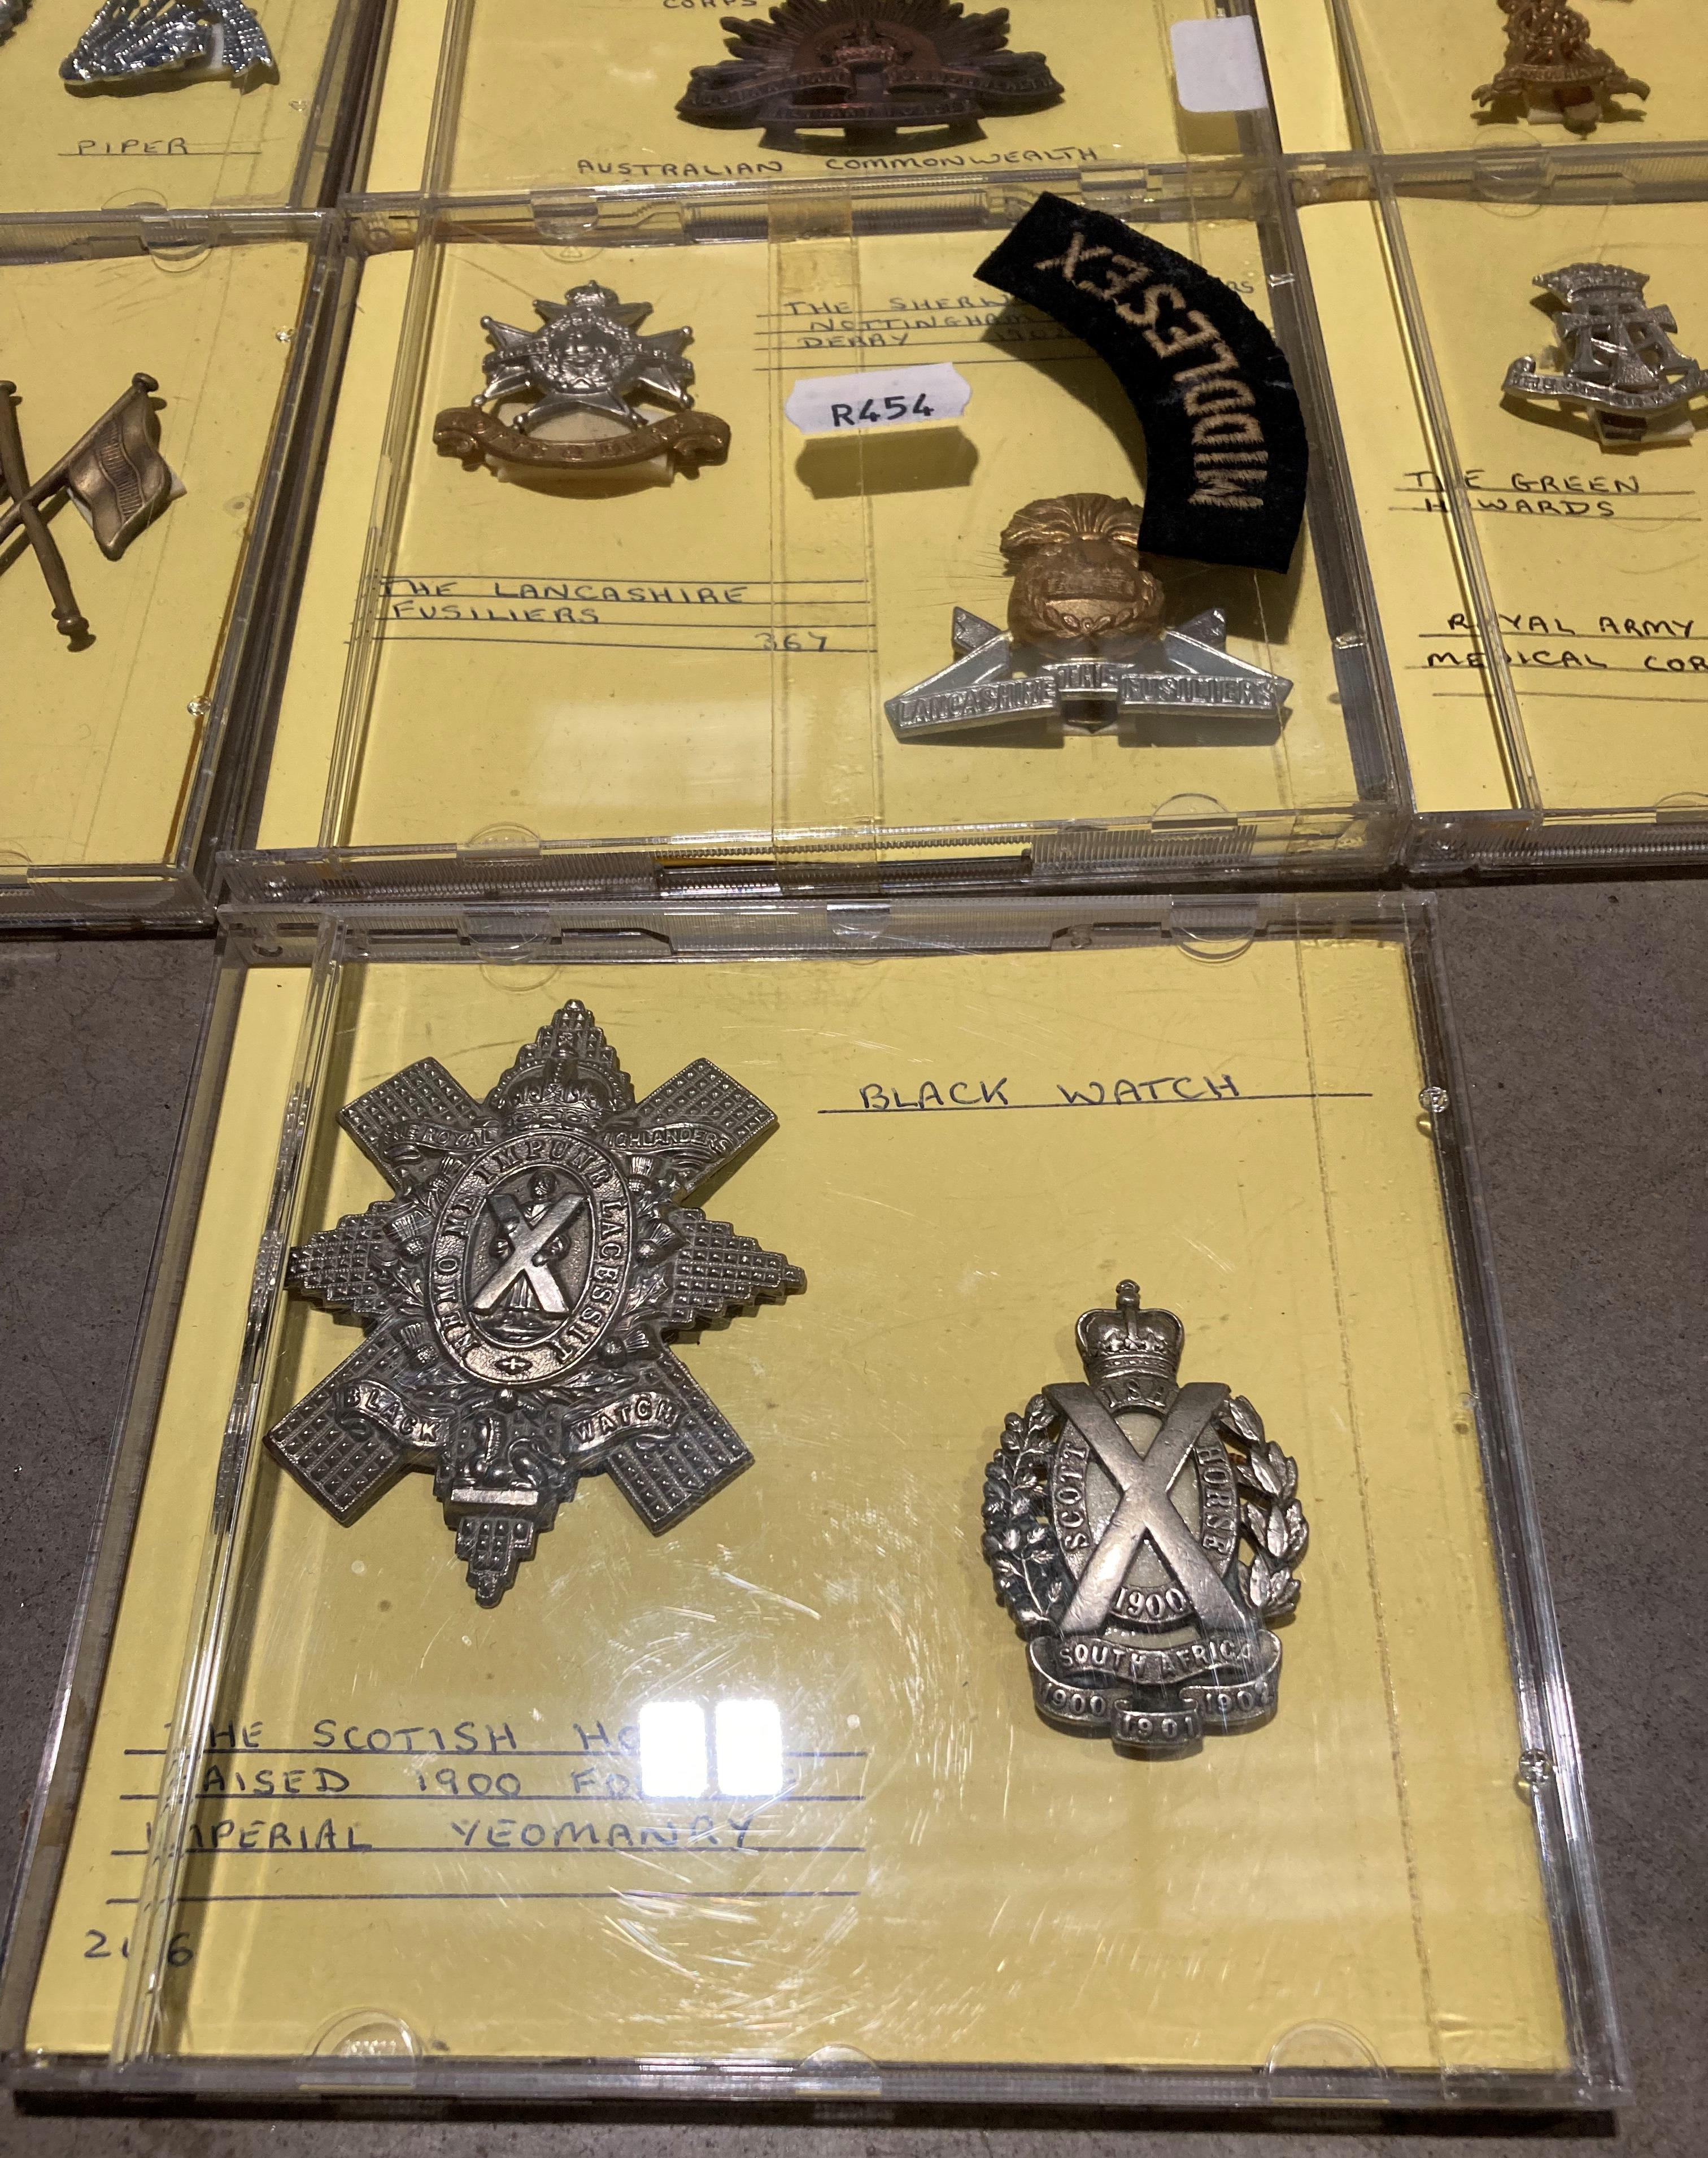 Briefcase and contents - 45 cap badges set in CD cases - mainly British Military and Air Force - Image 4 of 5